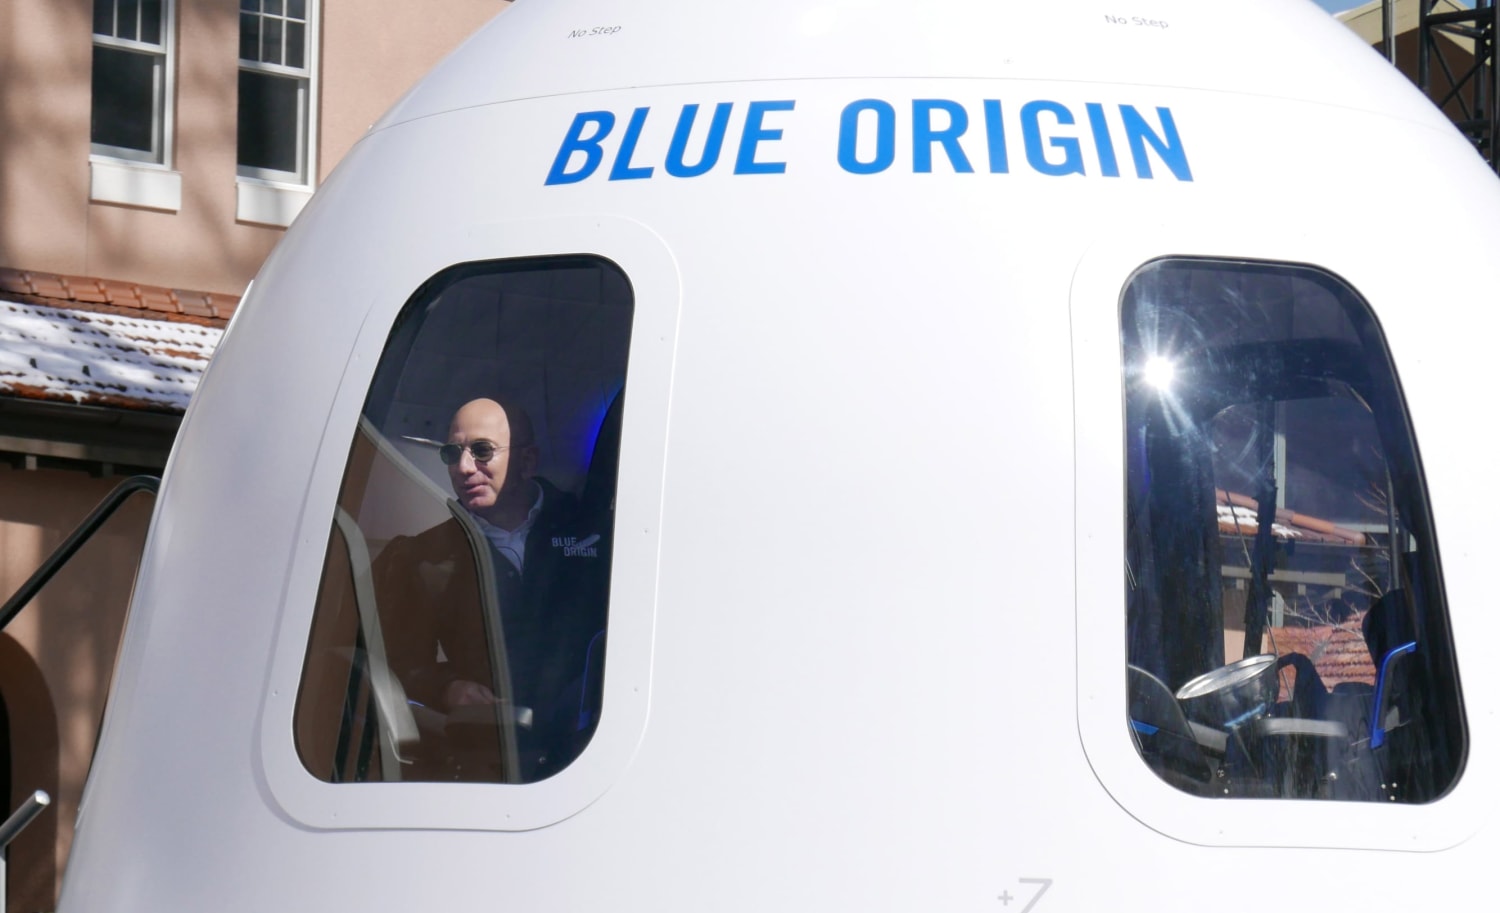 Jeff Bezos will fly on the first passenger spaceflight of his company Blue Origin in July